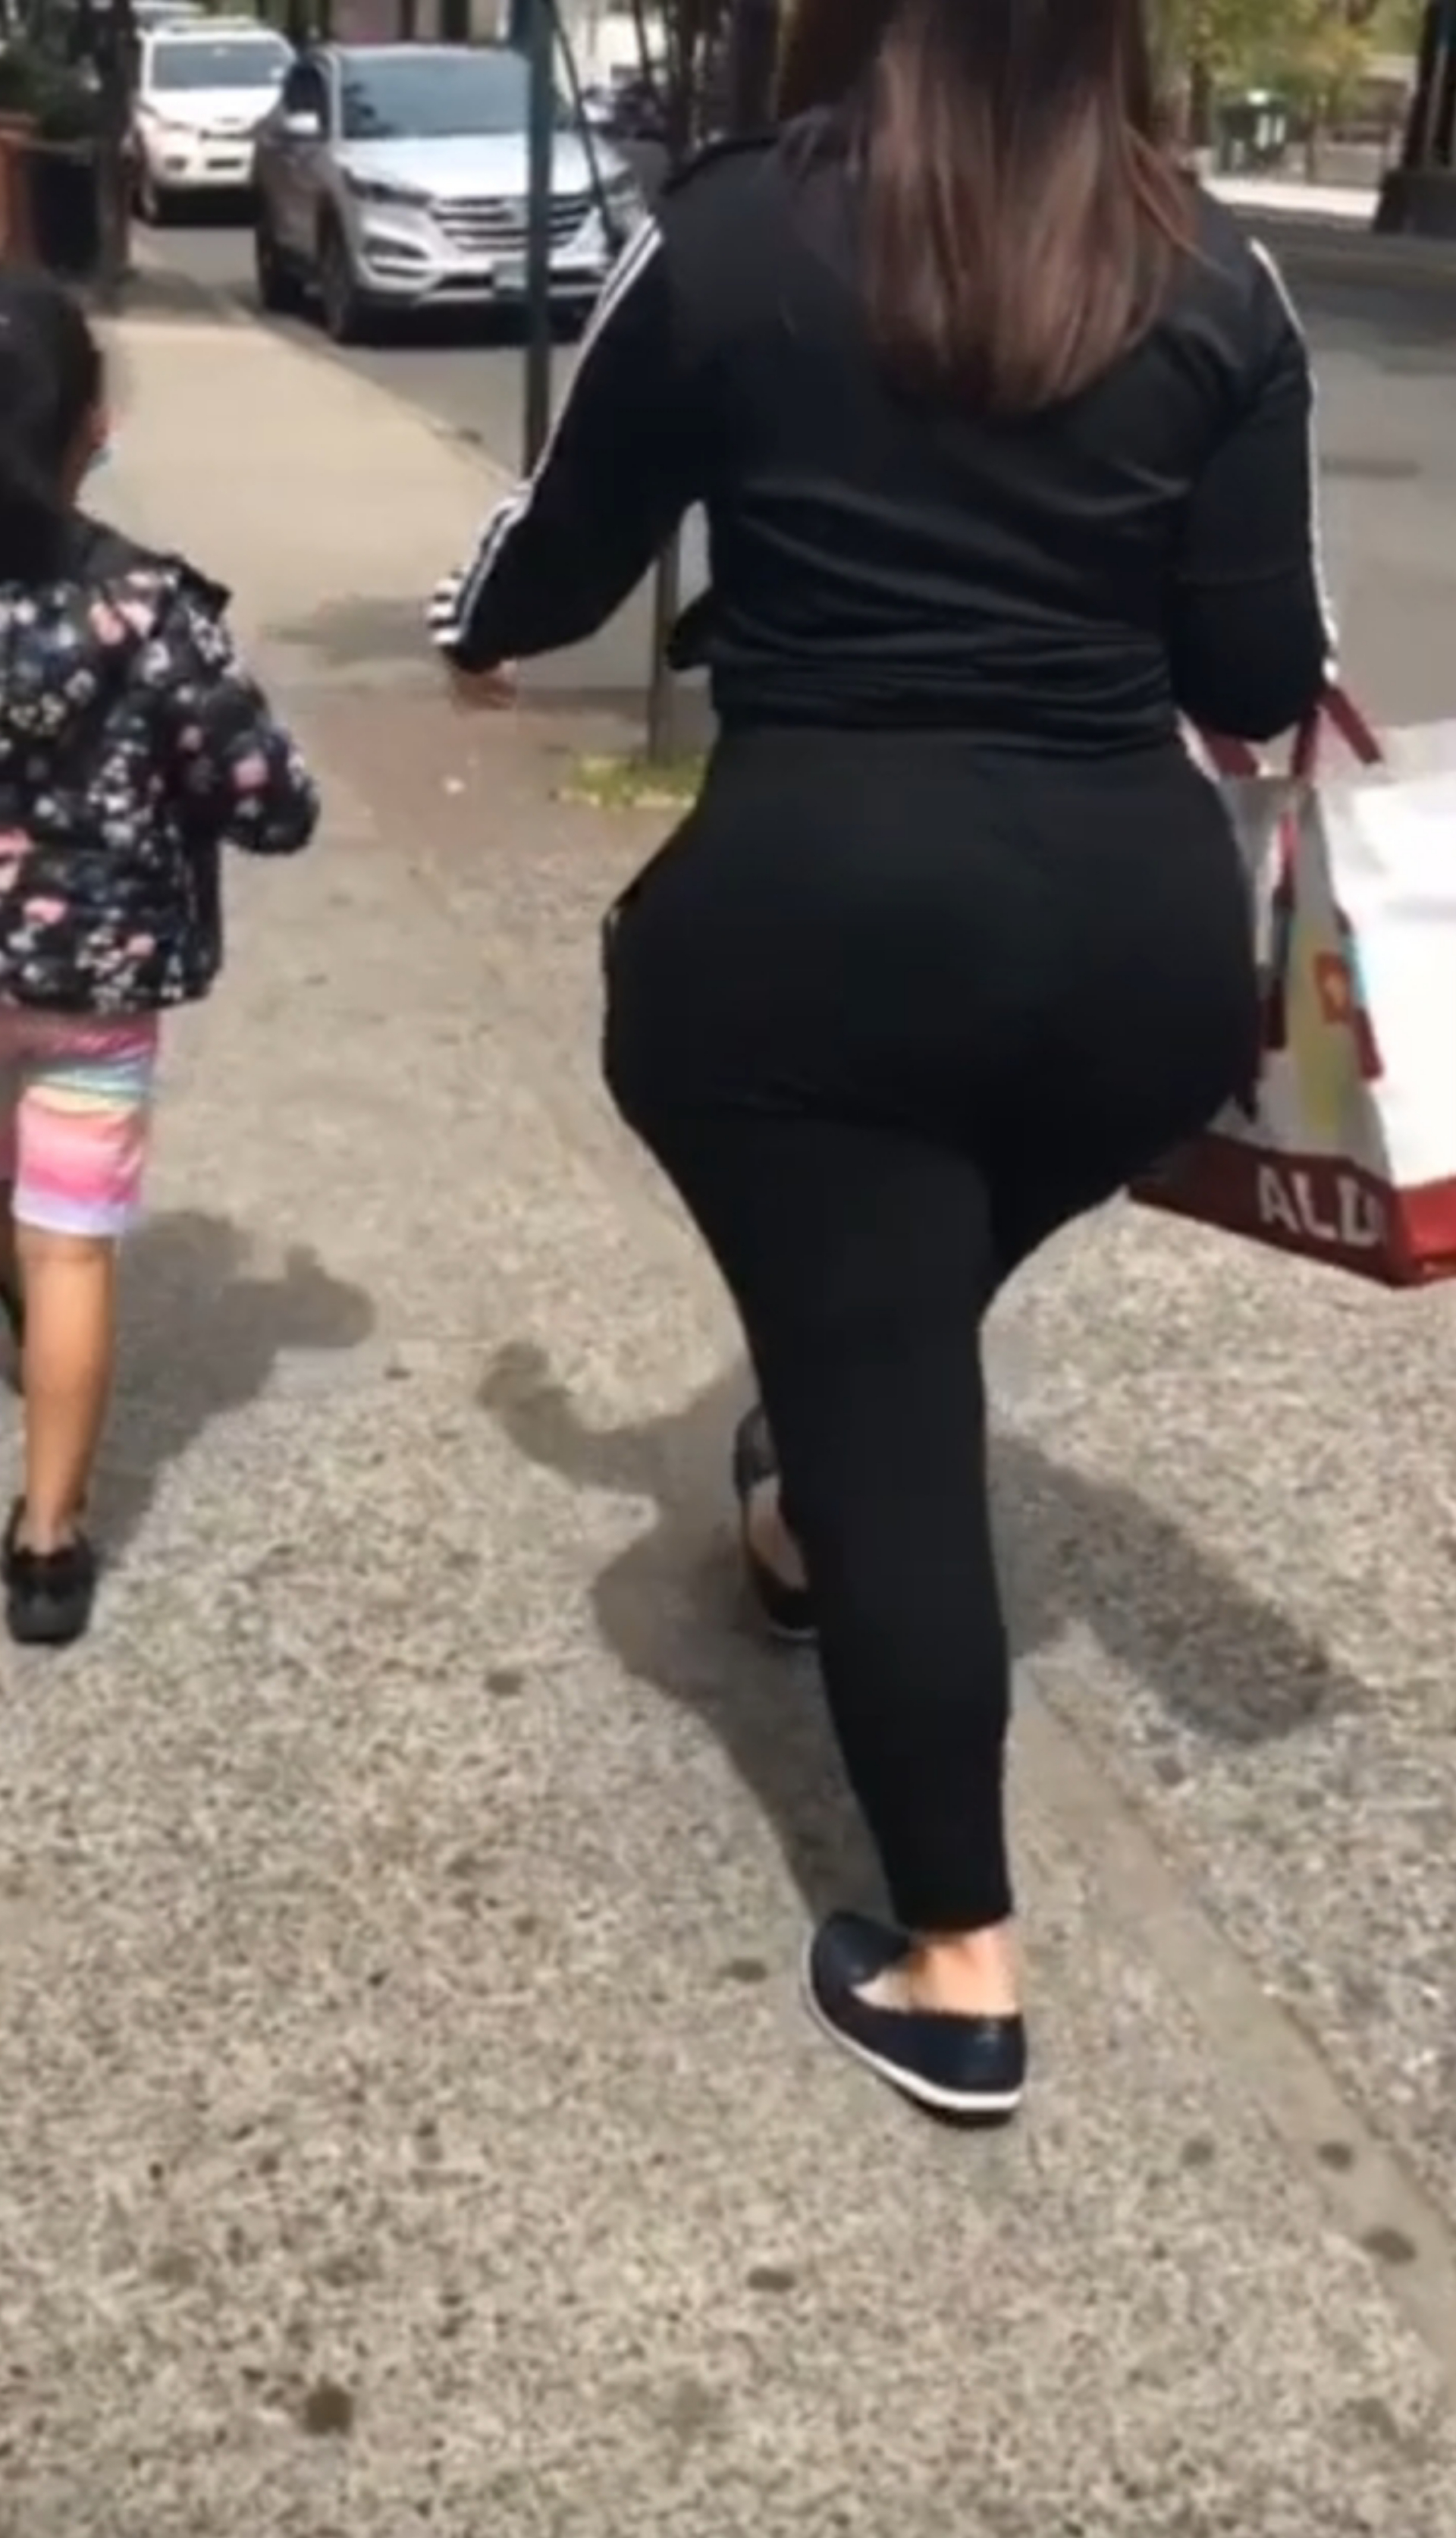 MONSTER PHAT ASS LATINA DIPPED IN ALL BLACK